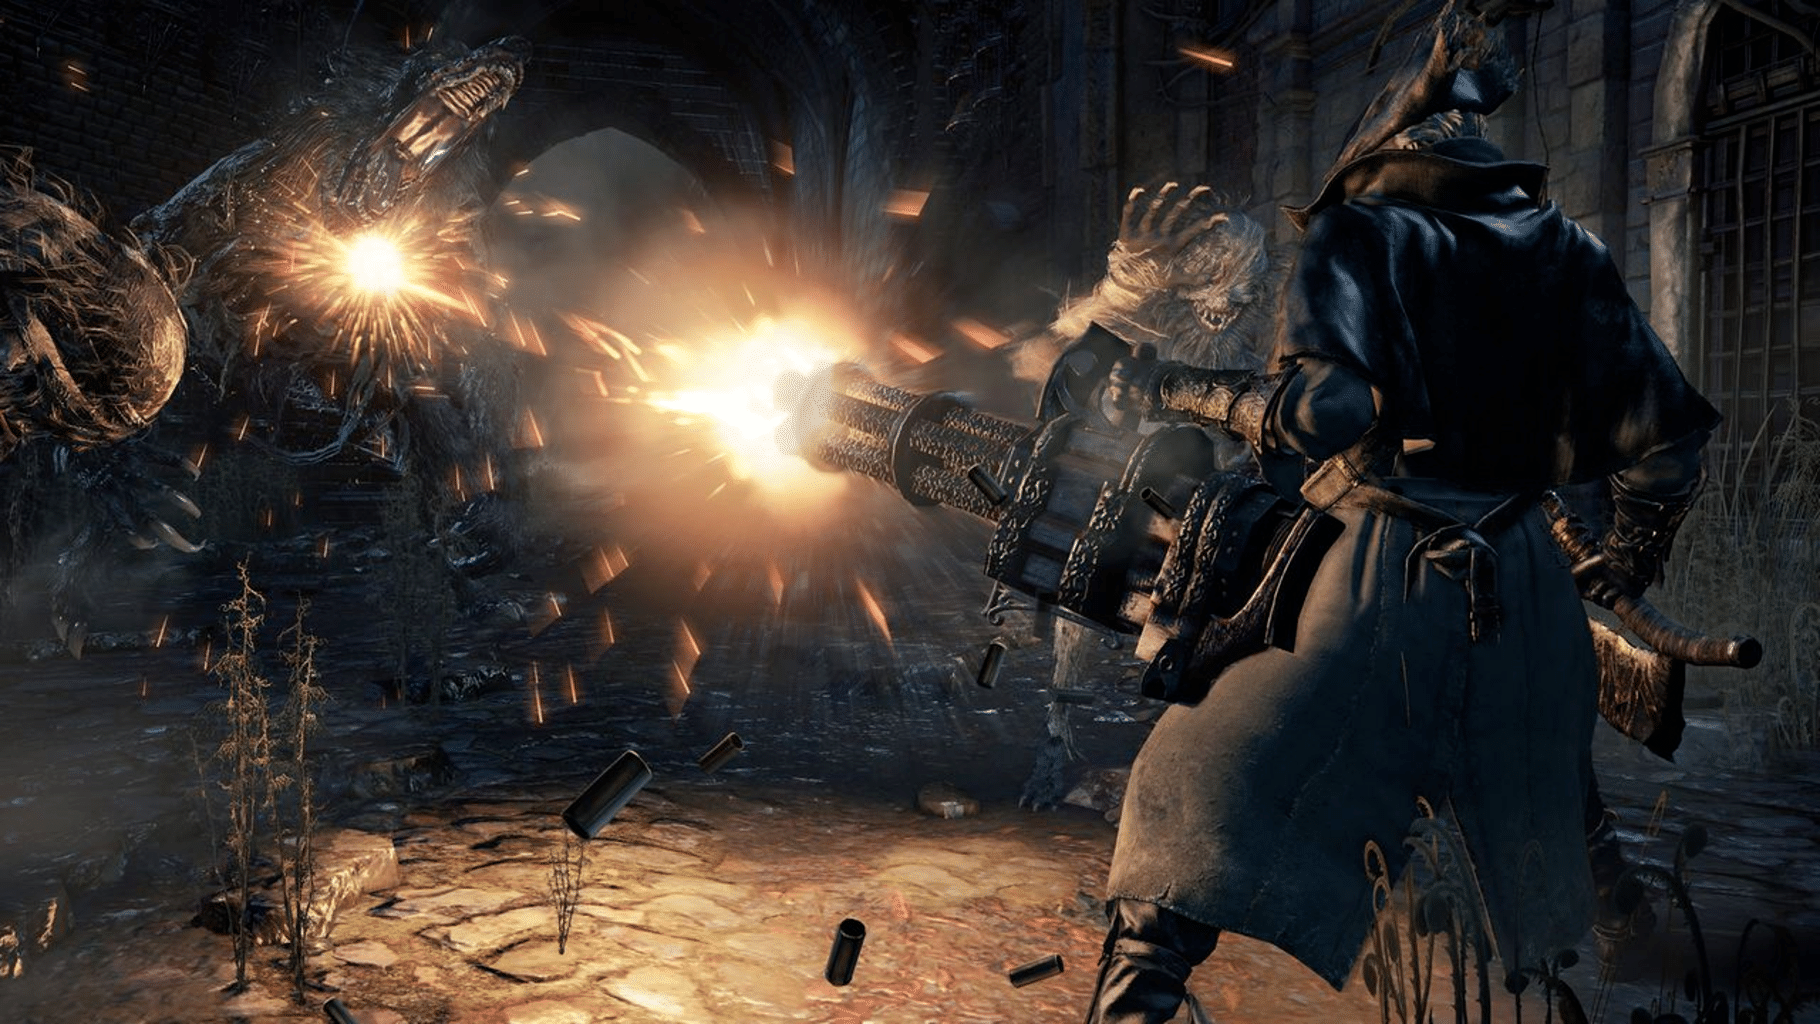 Bloodborne Game of the Year Edition launches this November